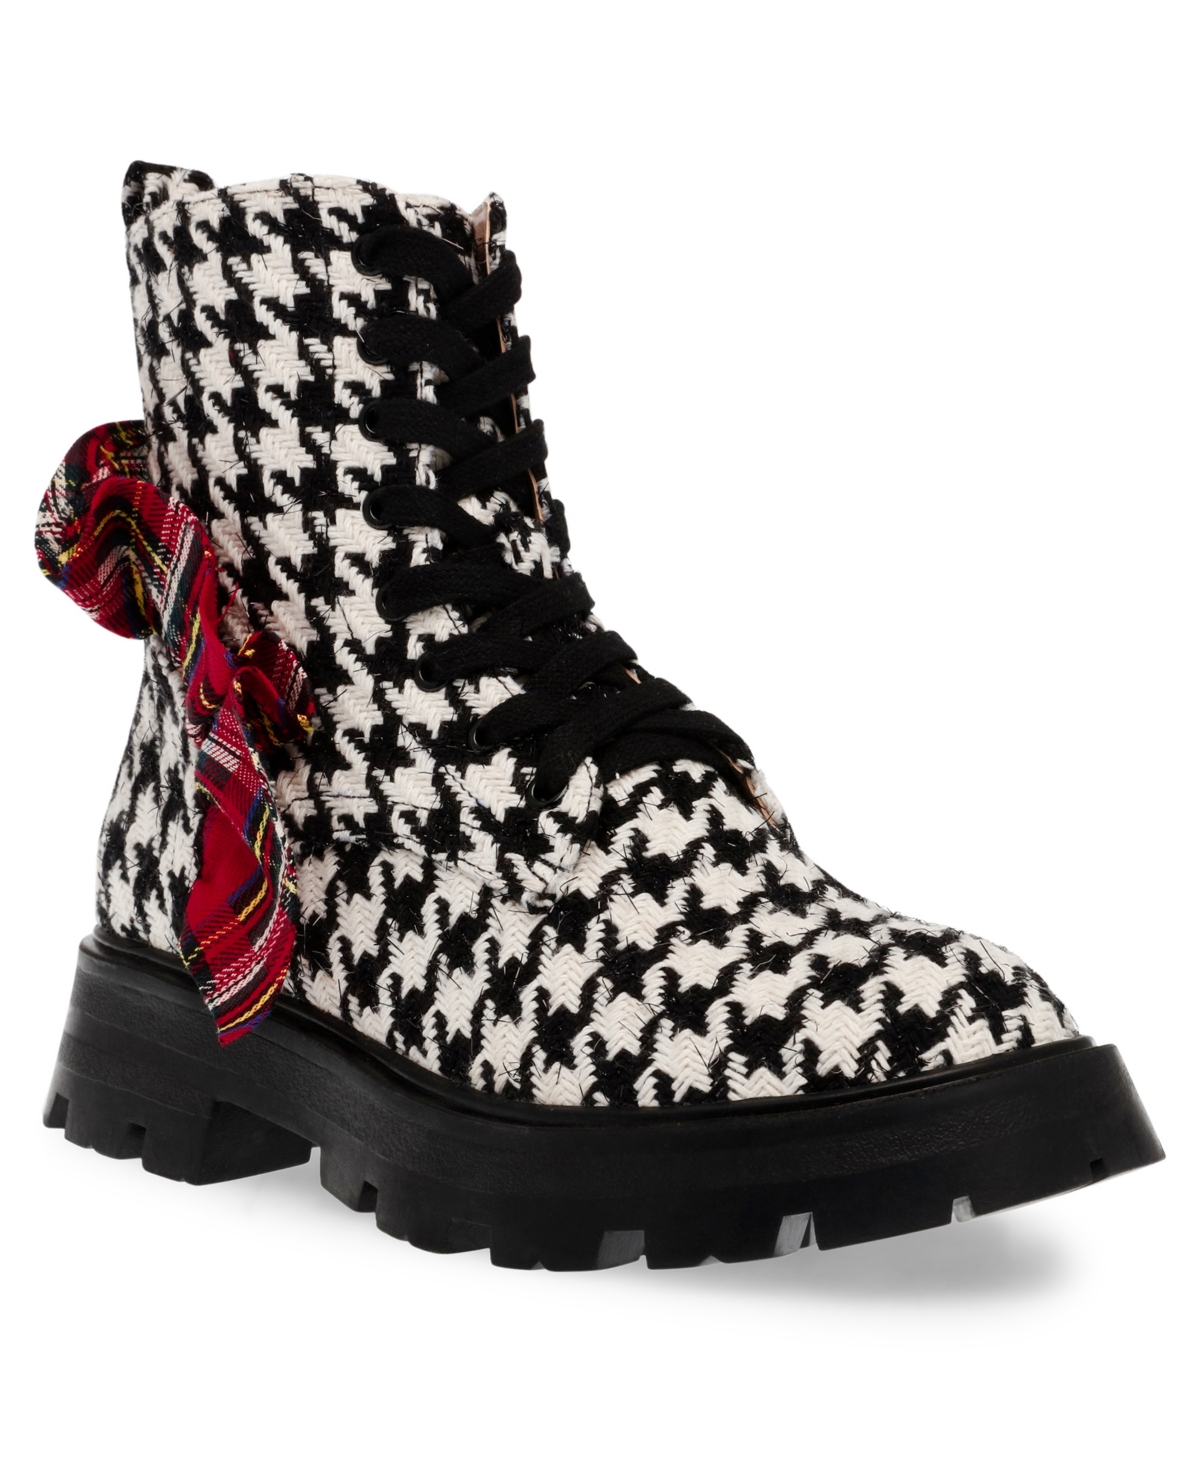 Women's Rozey Plaid Combat Boots with Contrast Ruffle - Houndstooth Multi